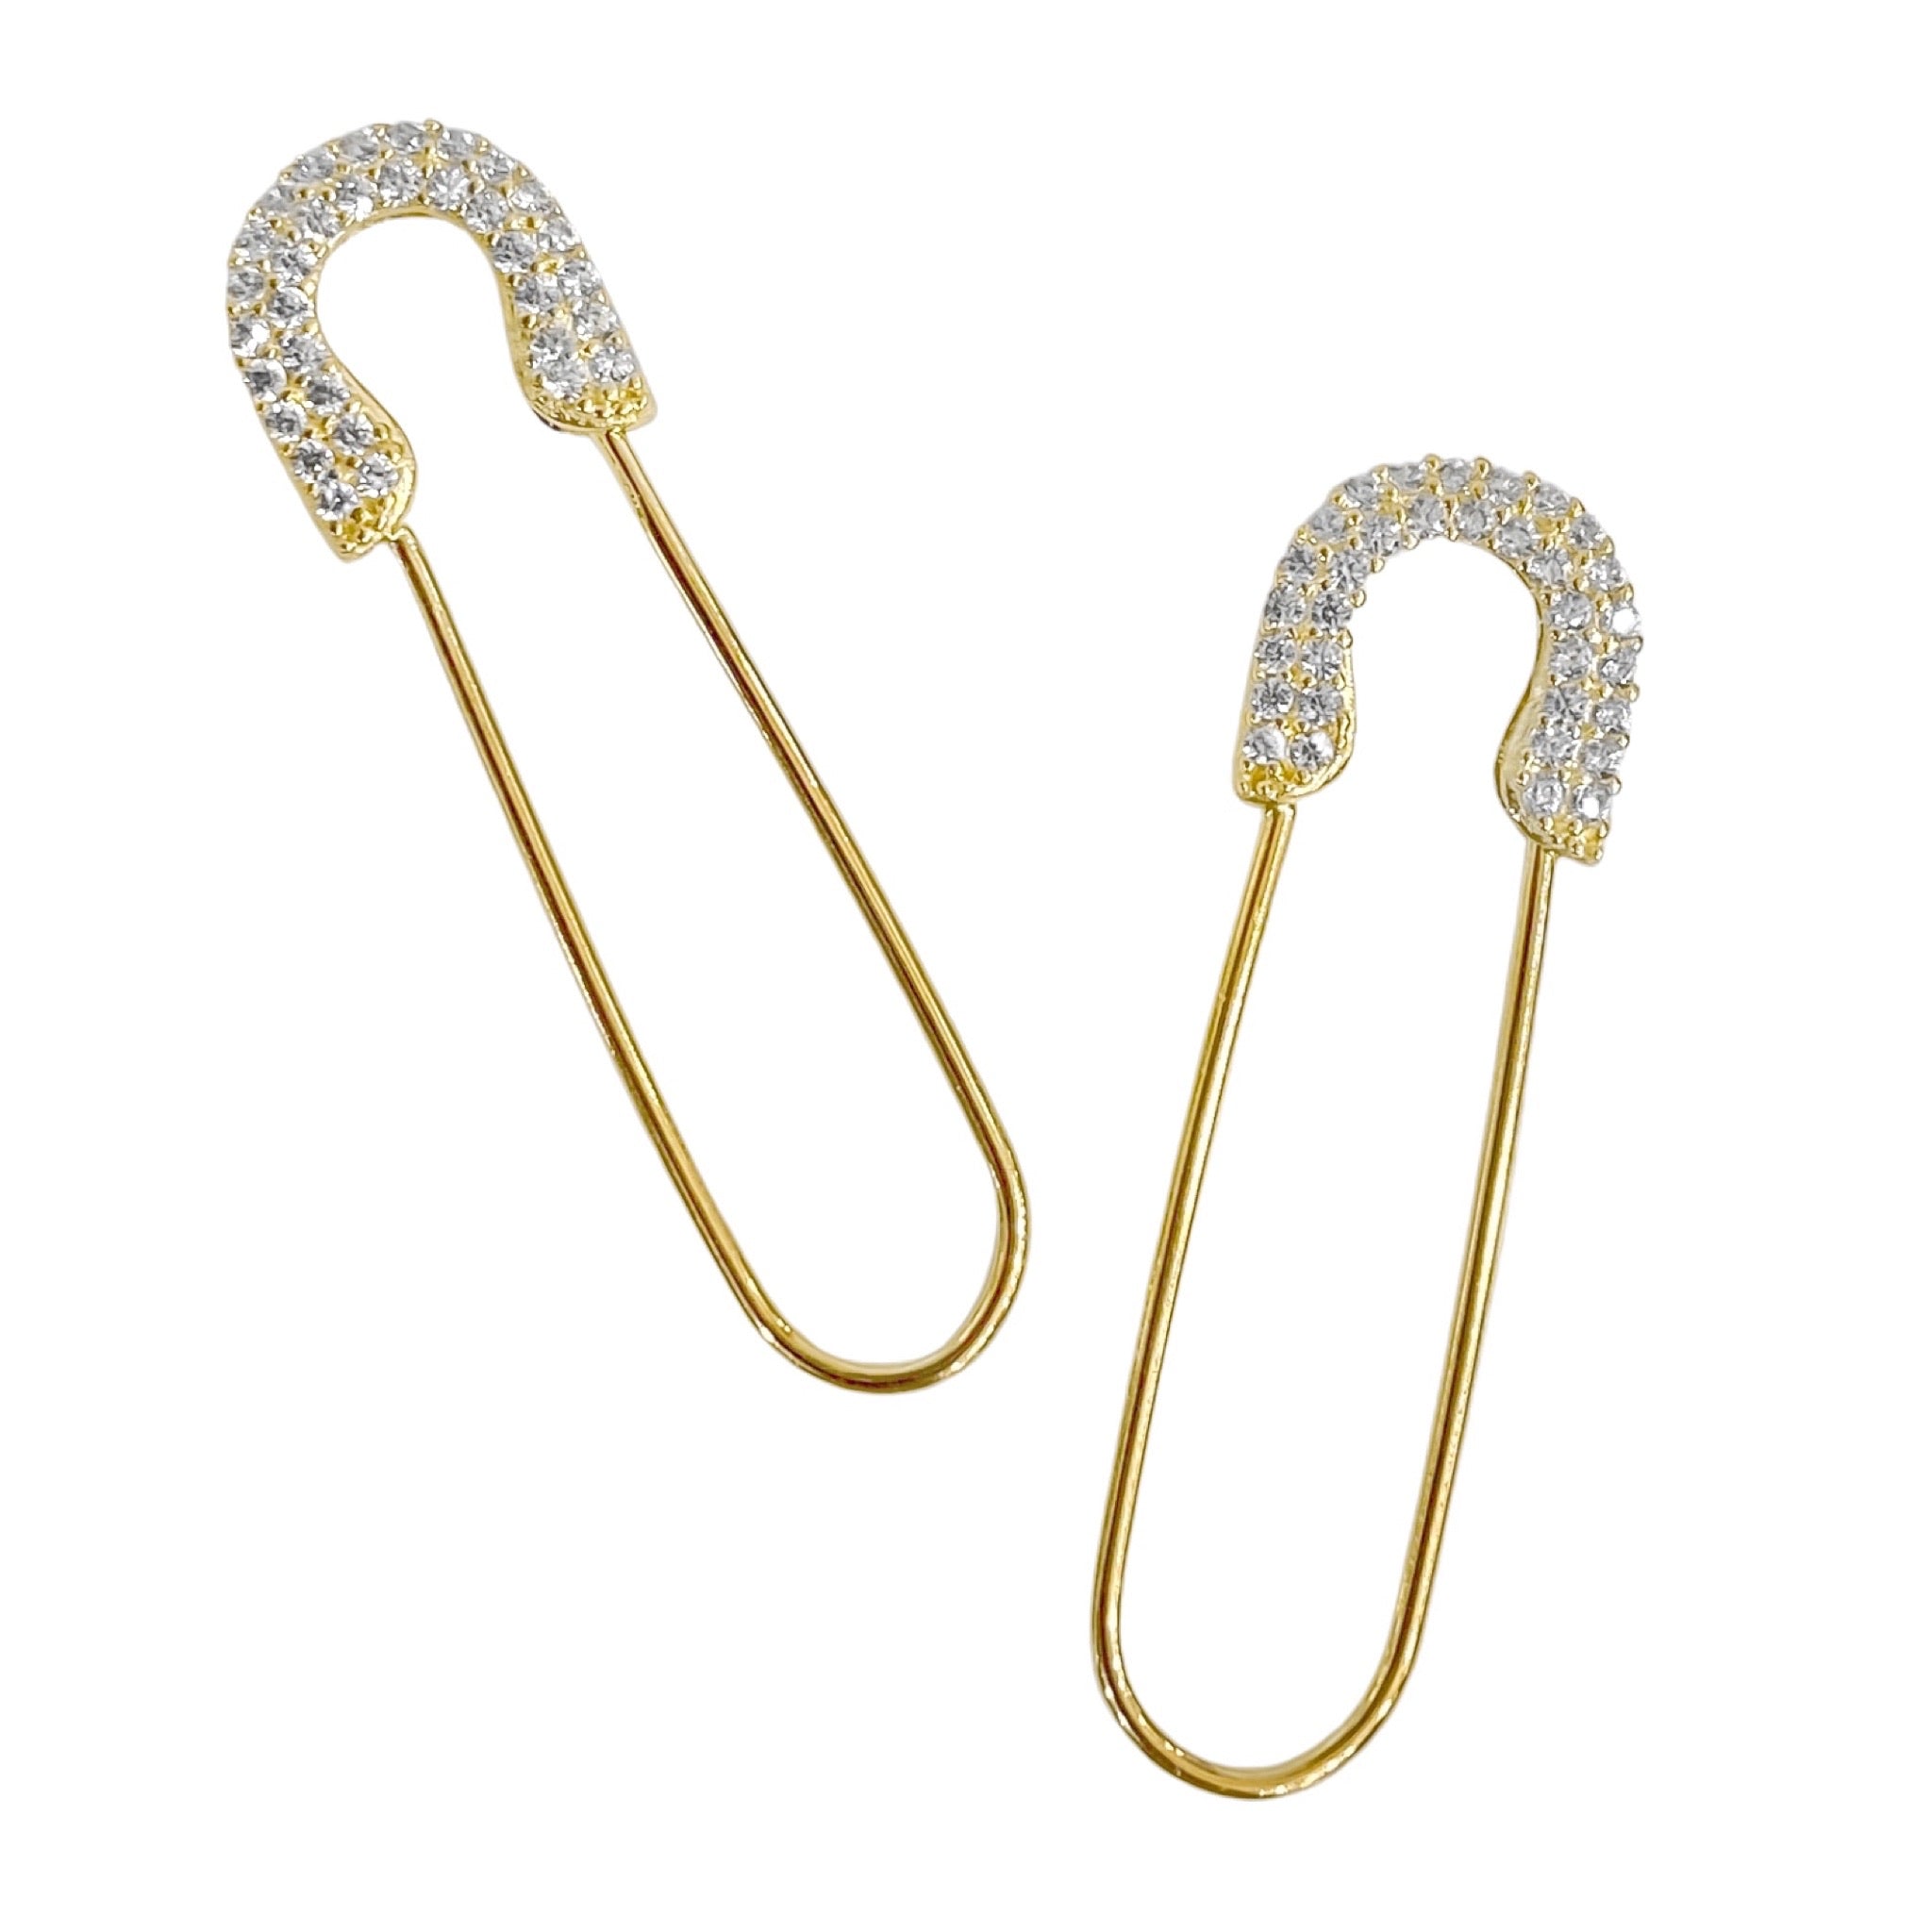 14K YELLOW GOLD LARGE PAVE SAFETY PIN EARRINGS